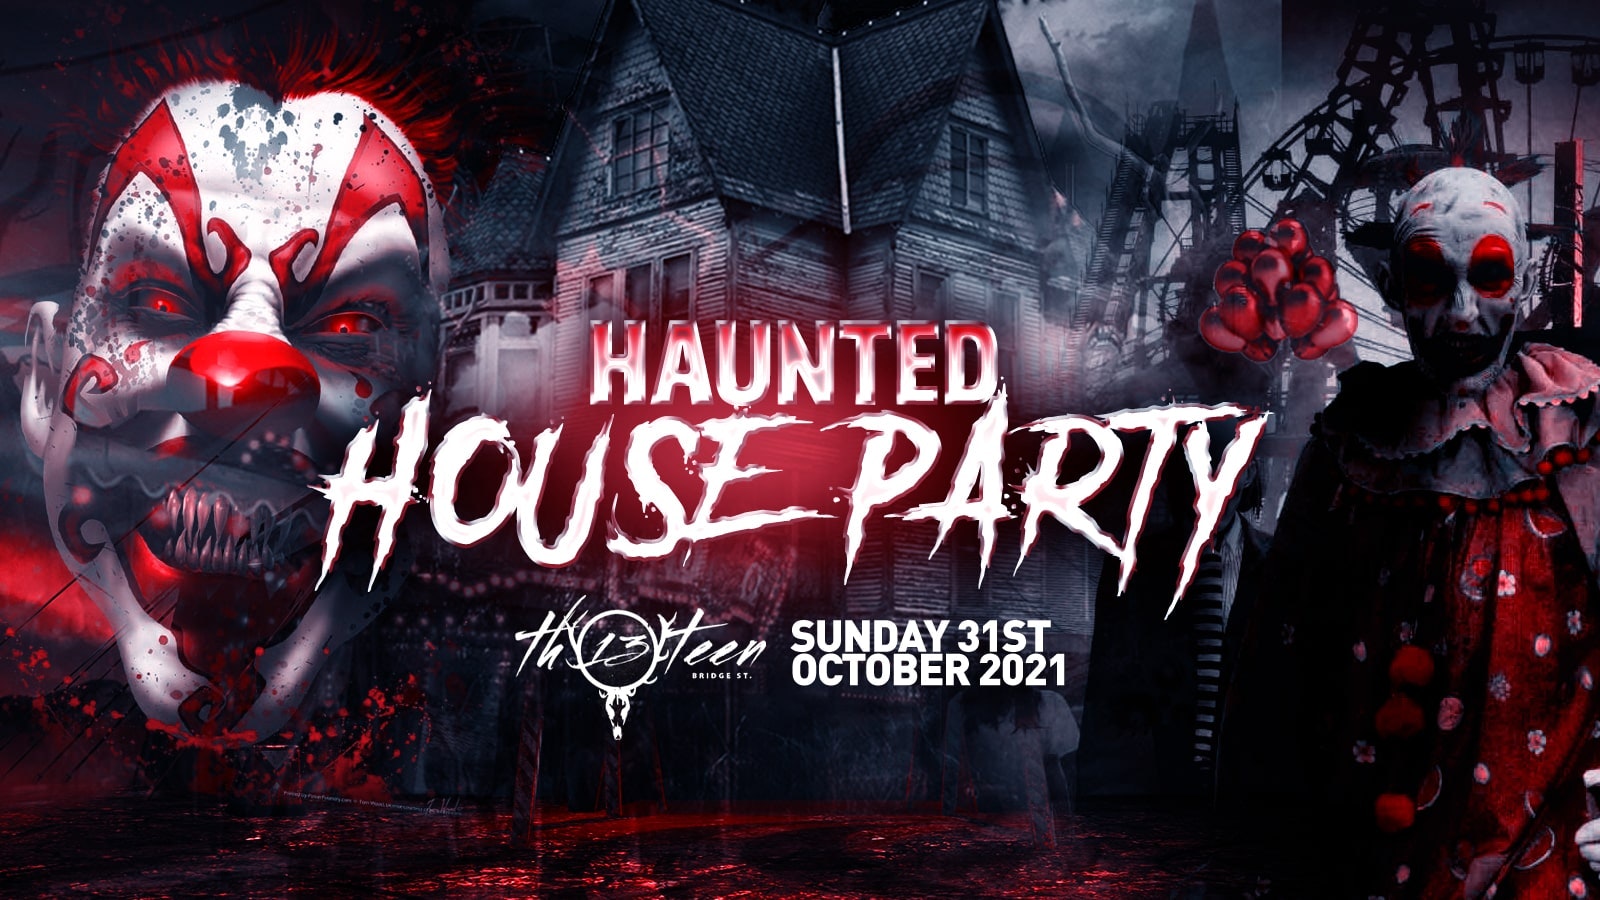 The Haunted House Party | Surrey / Guildford Halloween 2021 – FINAL 100 TICKETS!